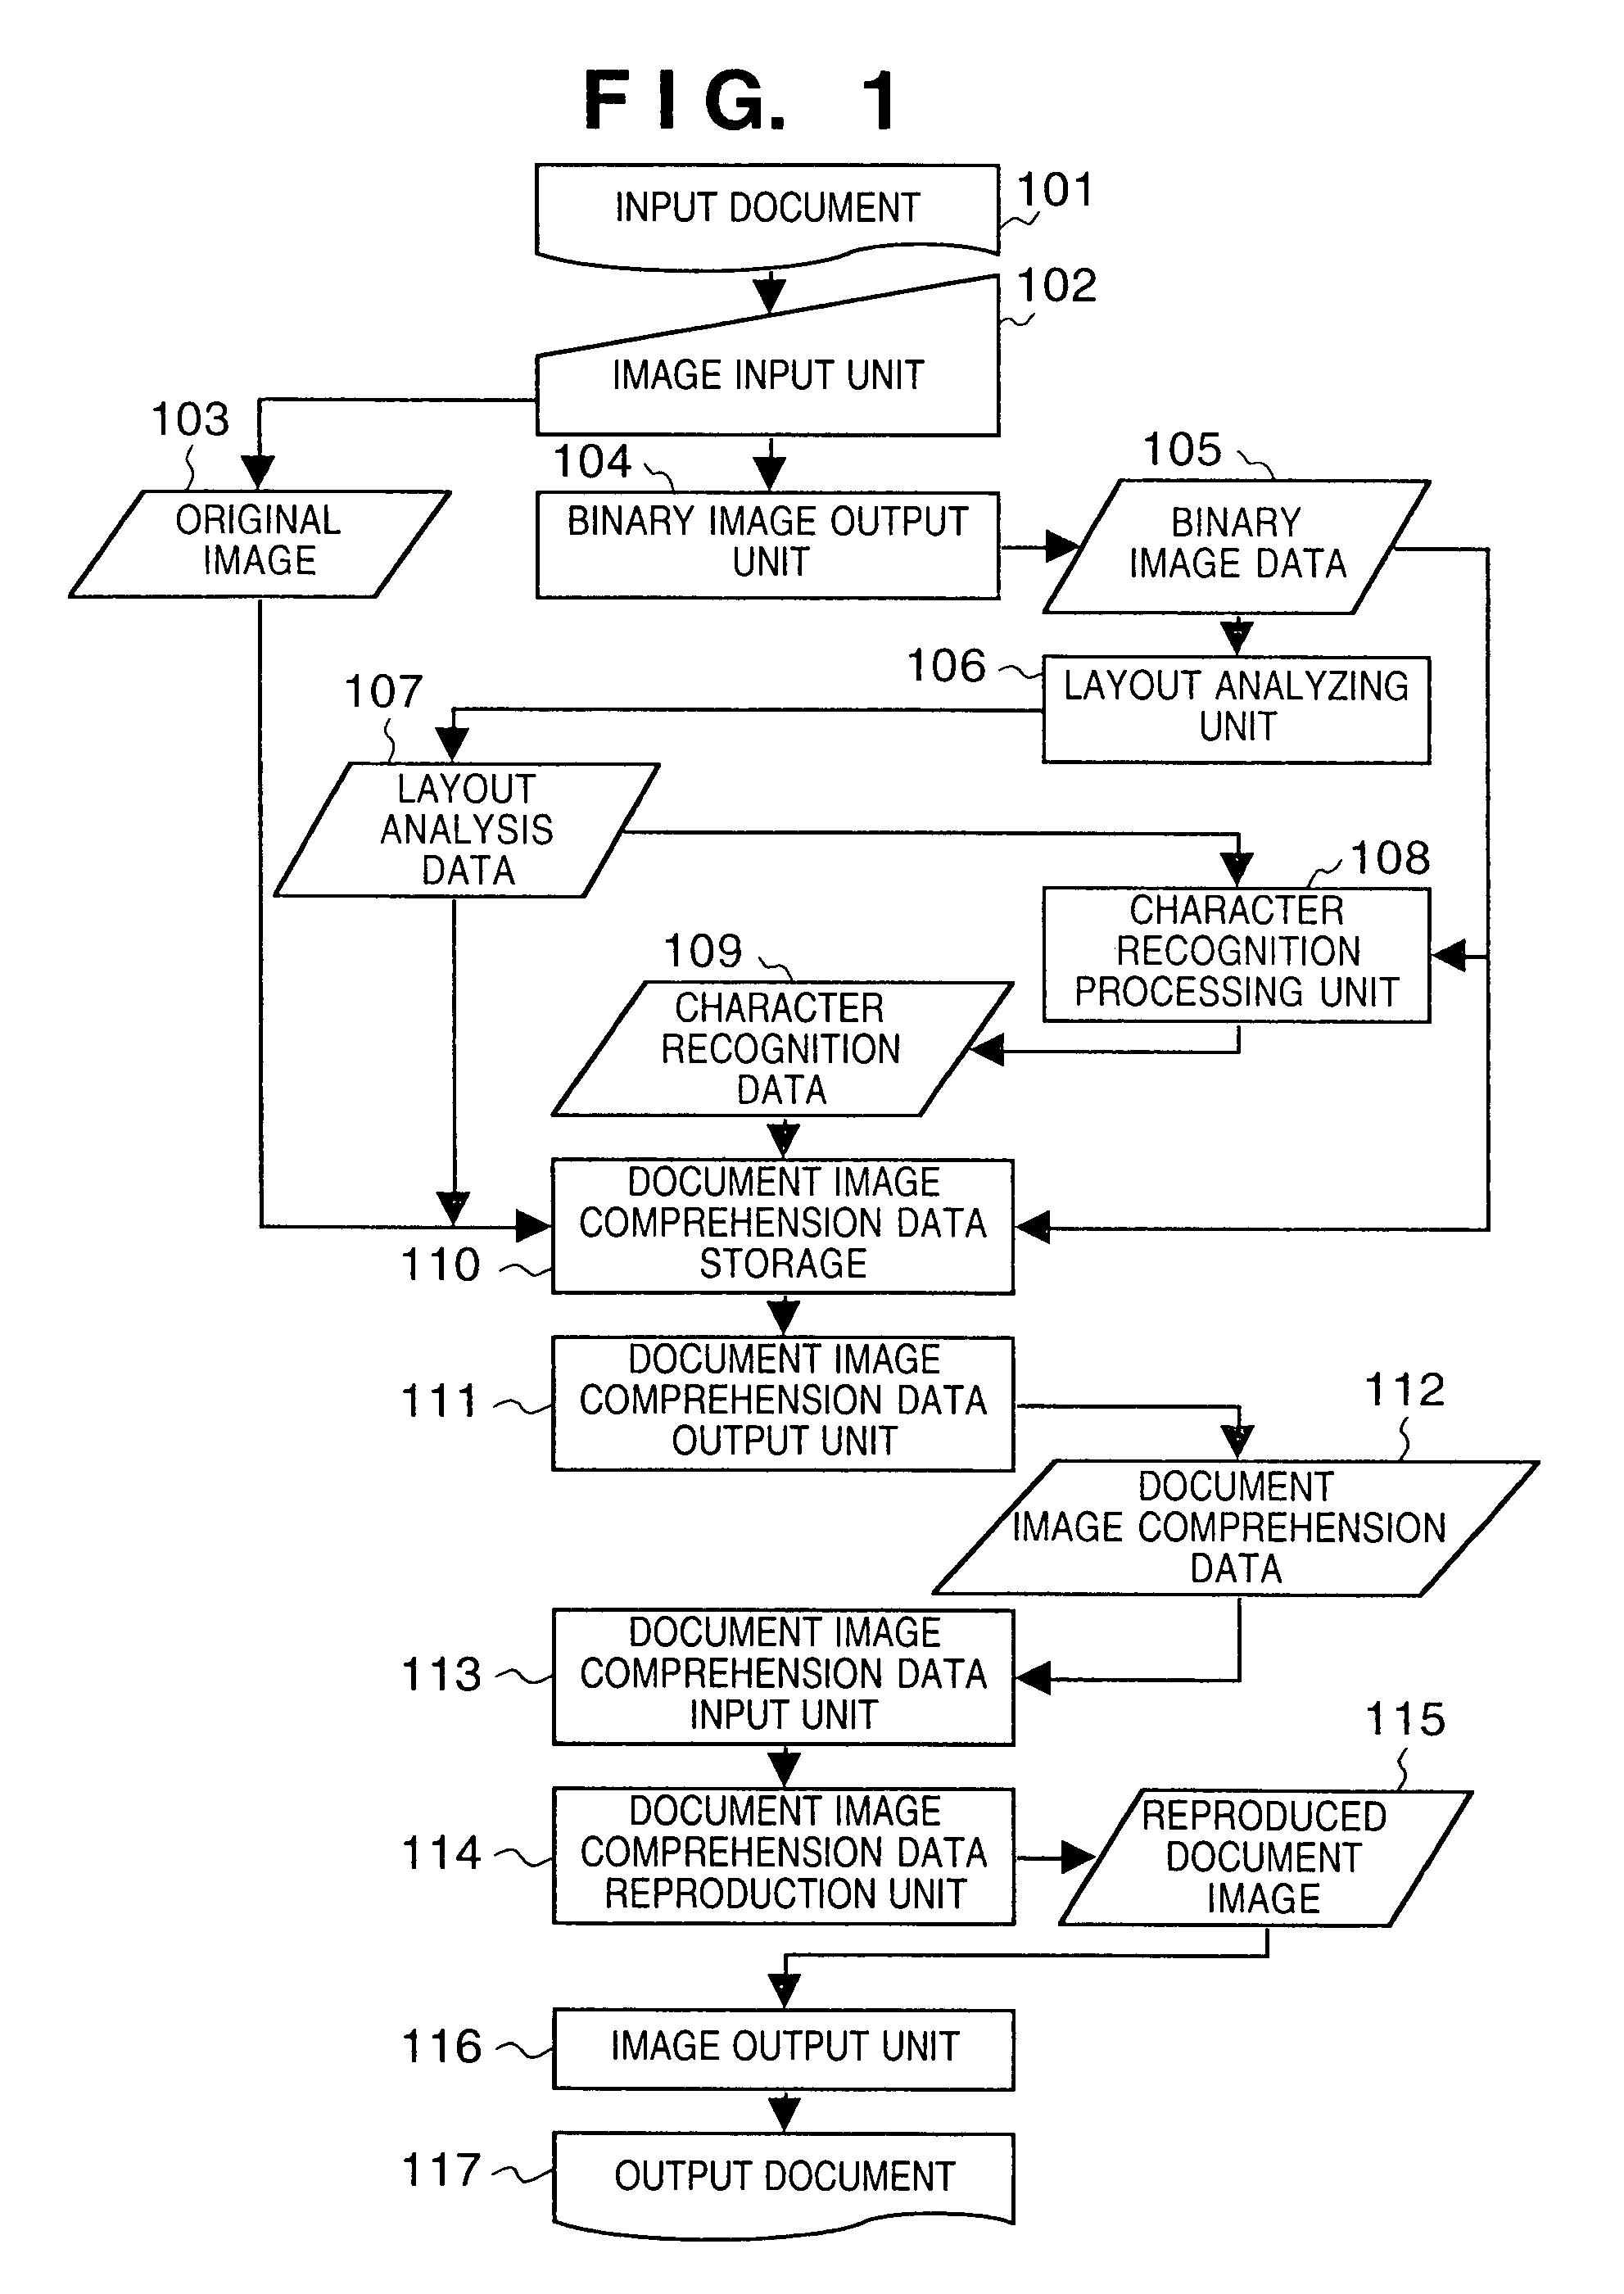 Image processing apparatus, image reproduction apparatus, system, method and storage medium for image processing and image reproduction